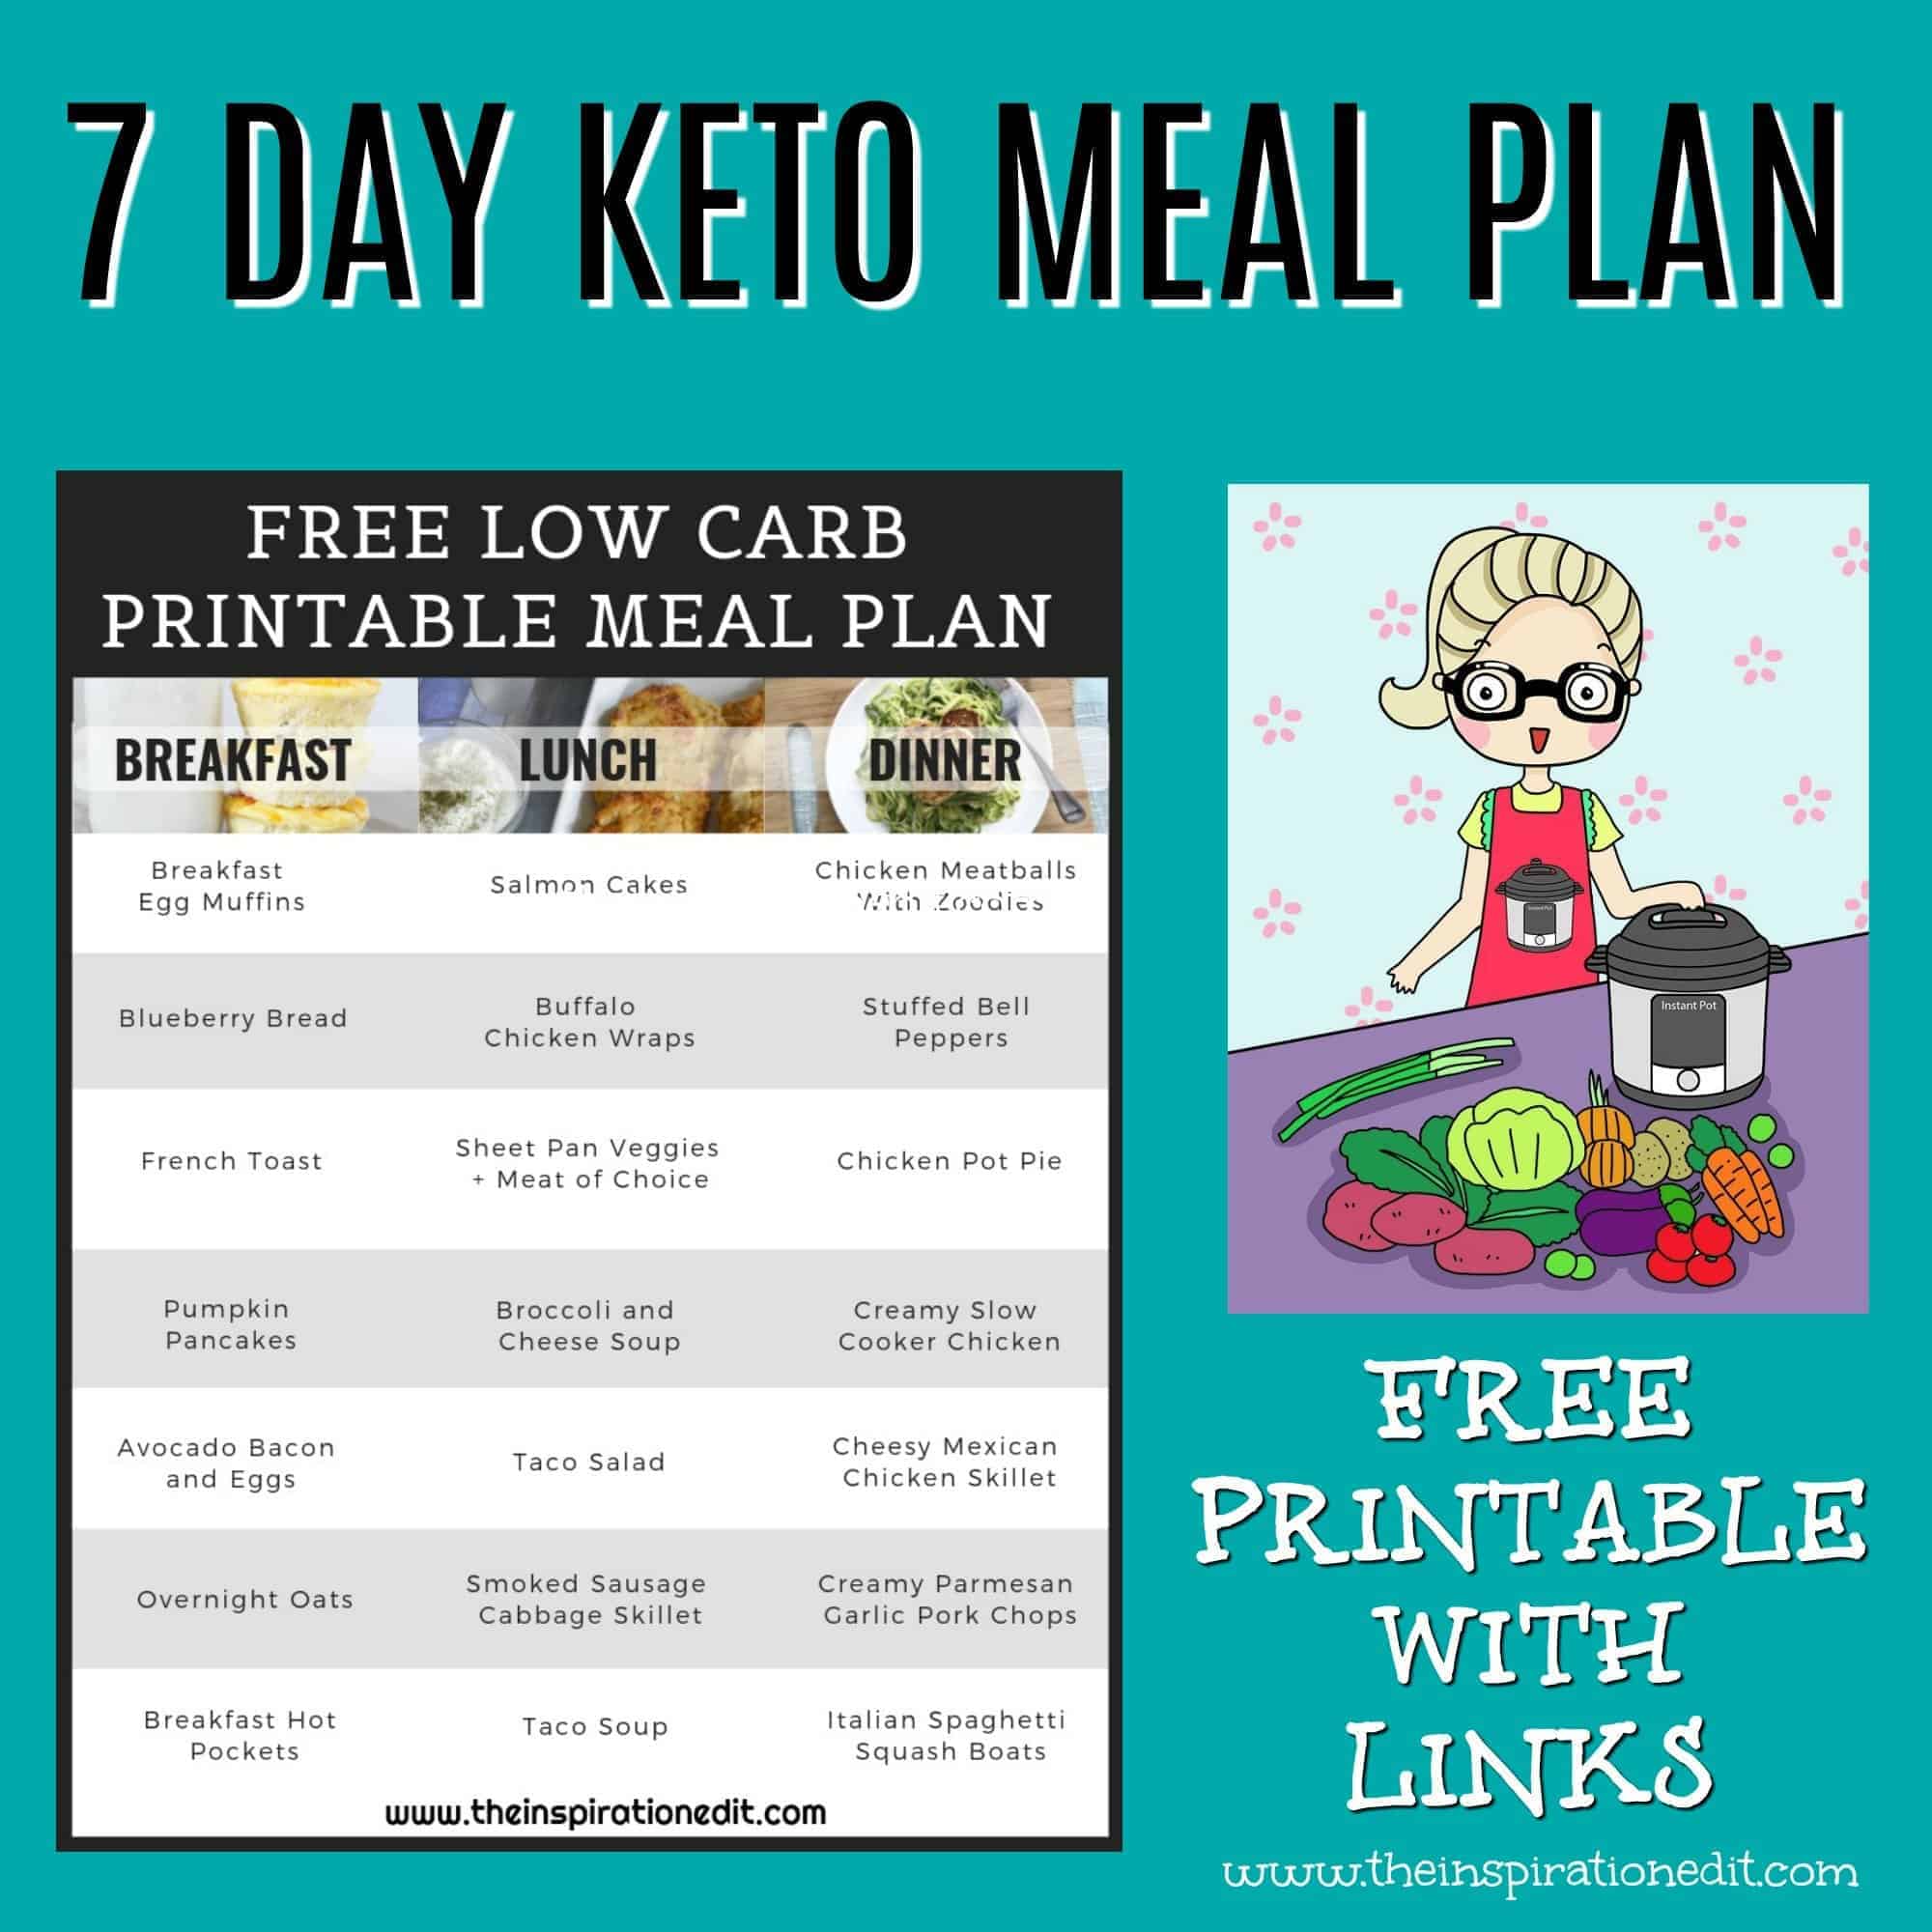 Use This Printable Keto Diet Meal Plan To Help You Get Started On The